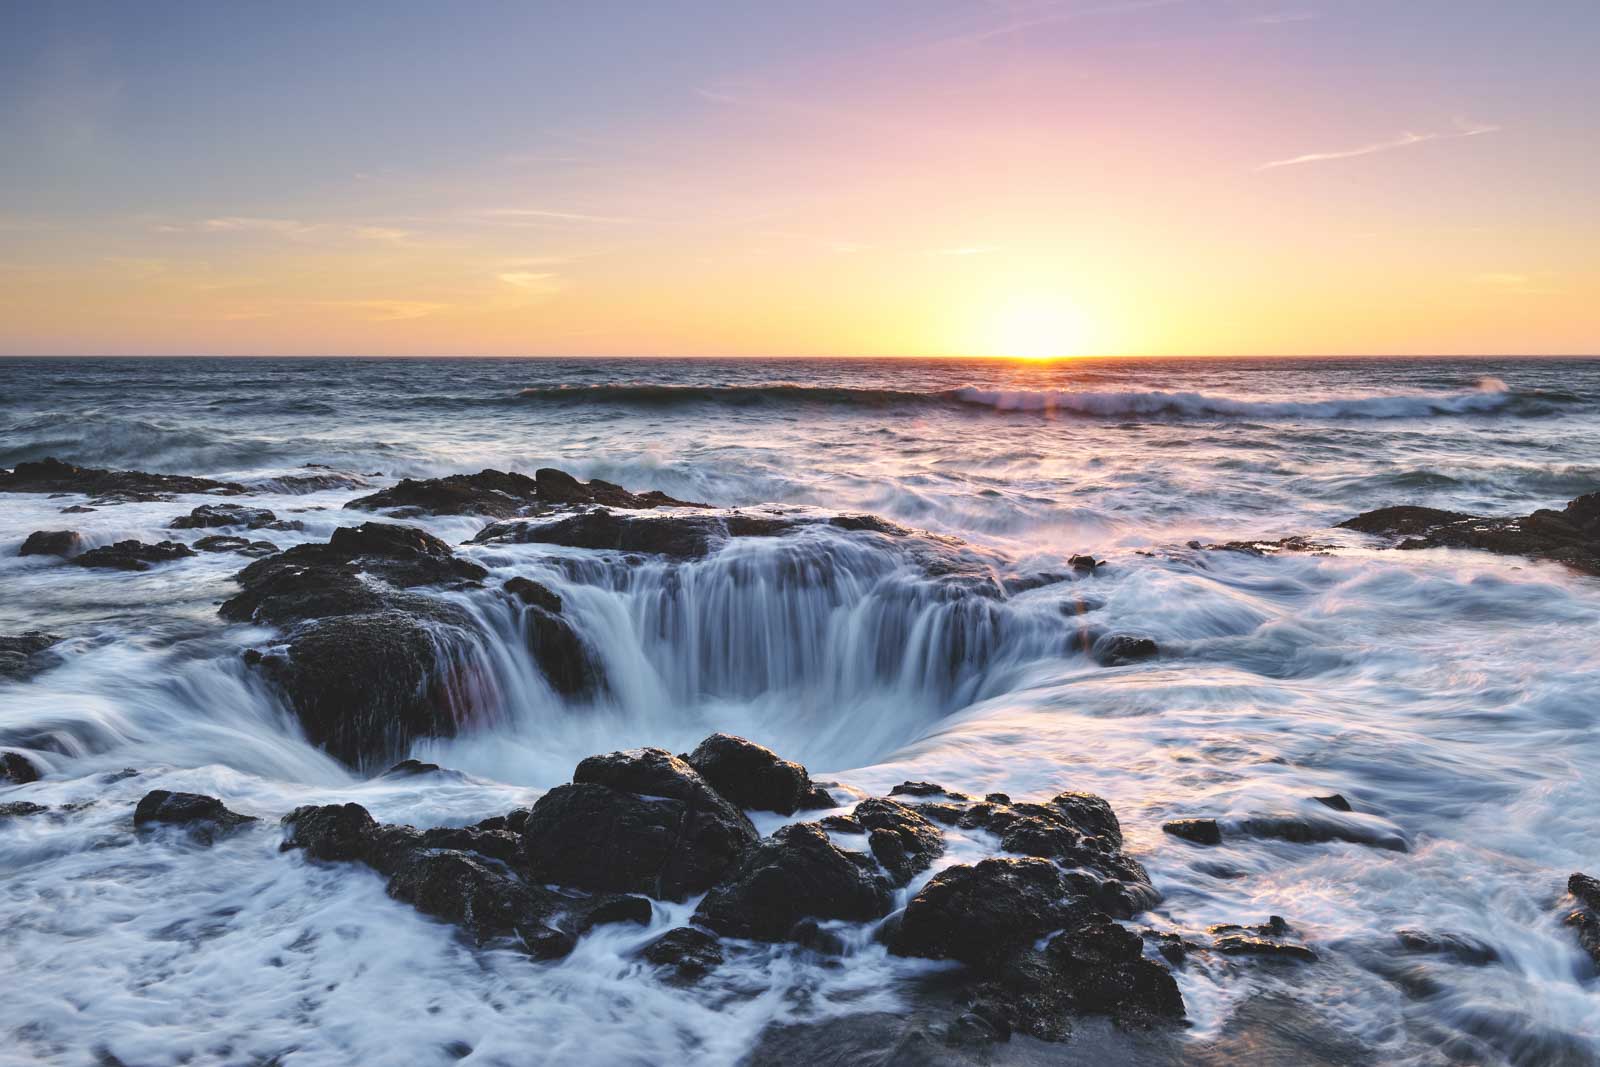 Sunset happening at the Thor's well